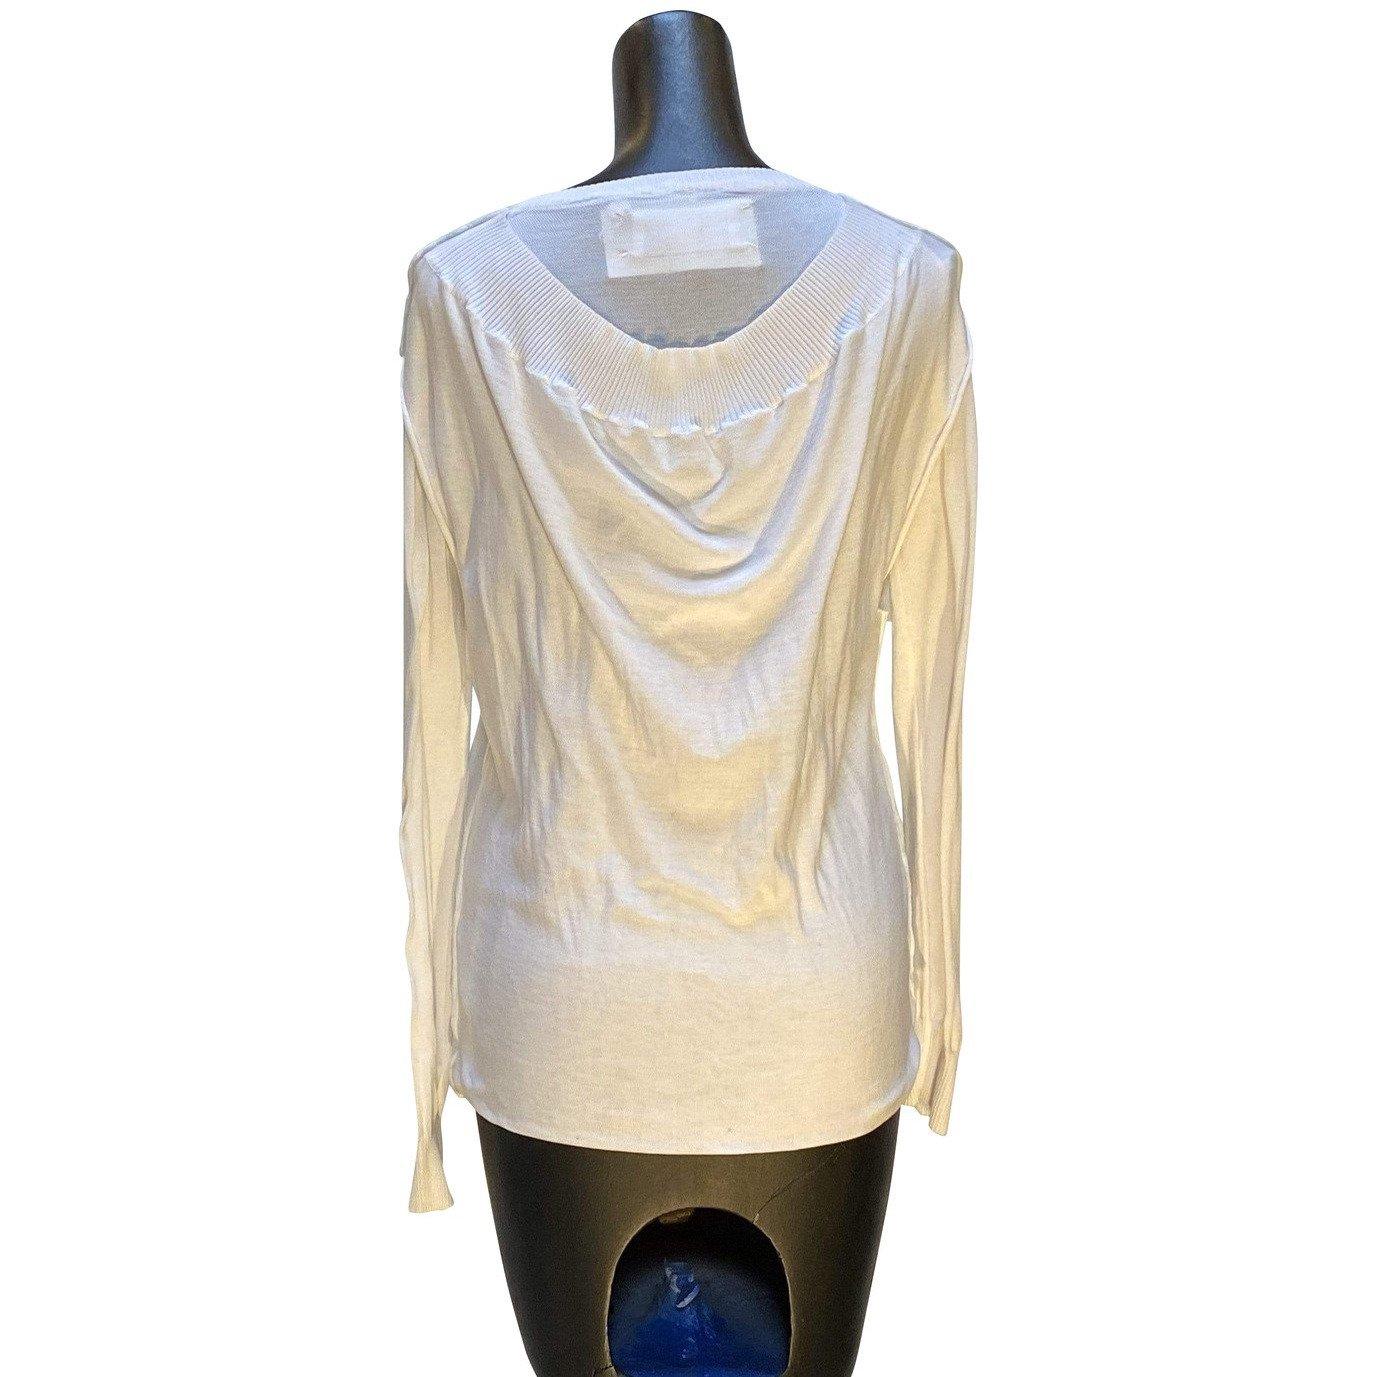 Maison Martin Margiela Long Sleeve Double Layer Top In New Condition For Sale In Laguna Beach, CA